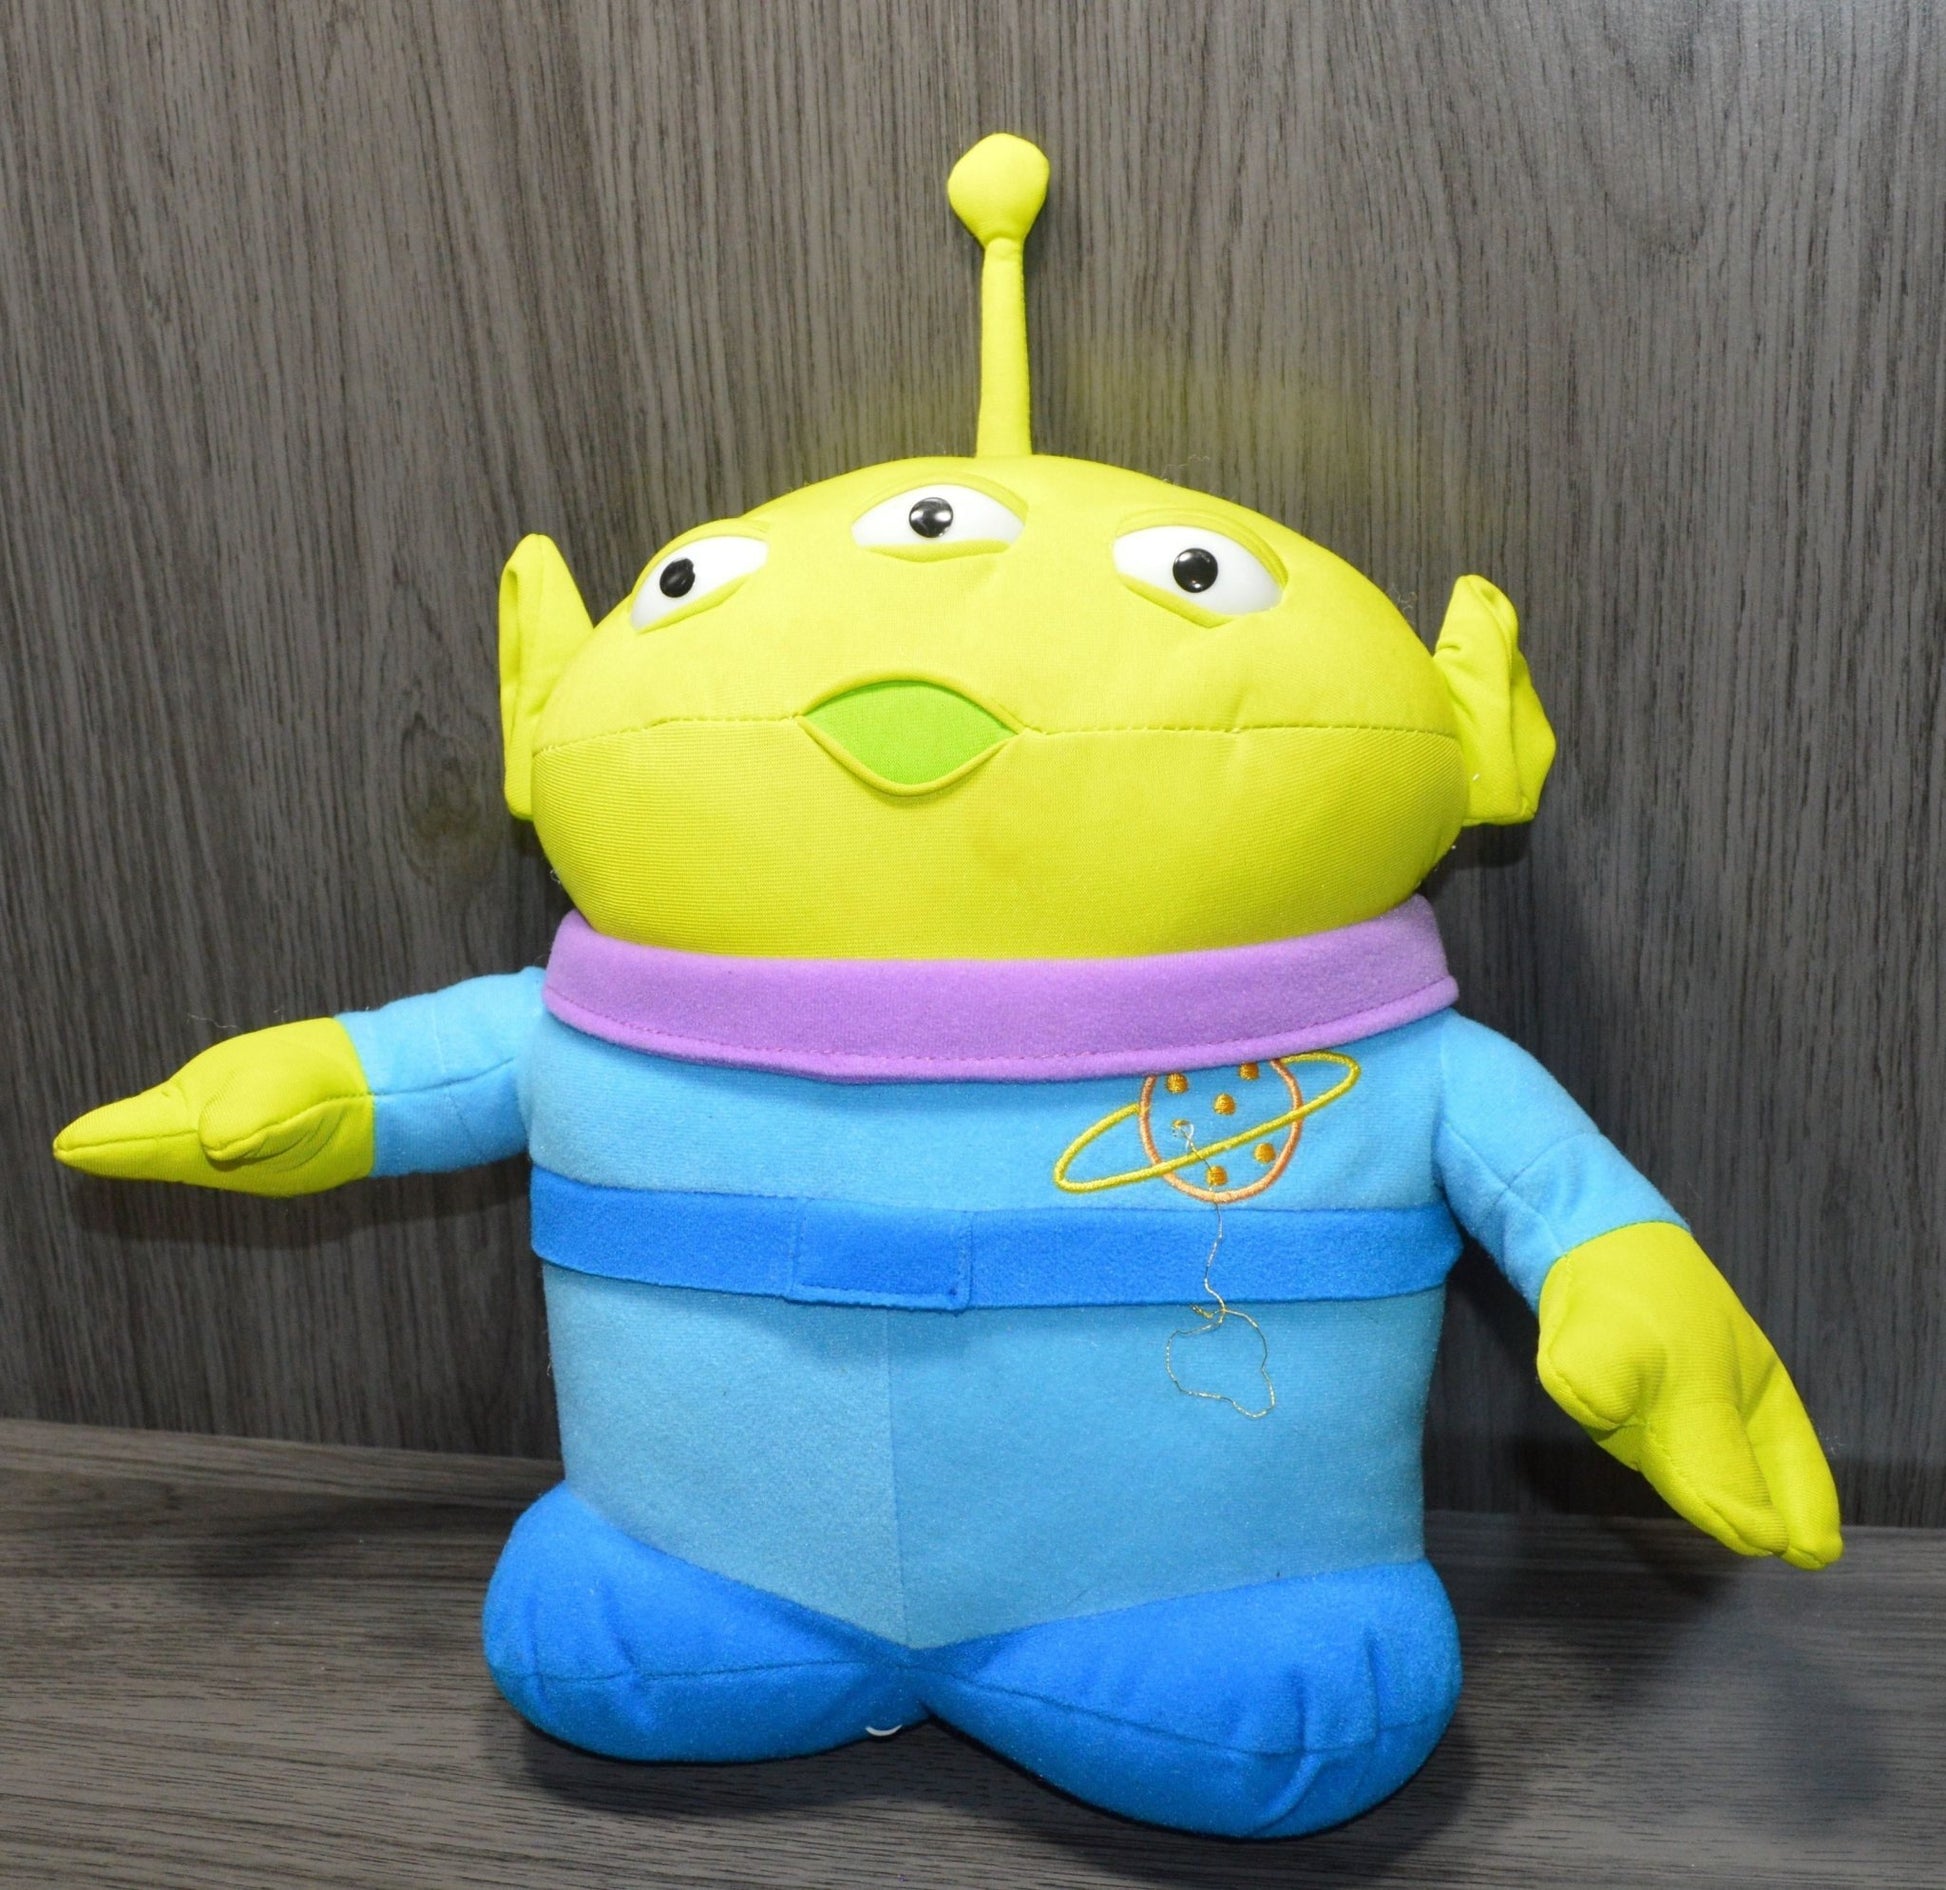 SOFT TOY DISNEY PIXAR TOY STORY ALIEN(PREVIOUSLY OWNED)GOOD CONDITION - TMD167207